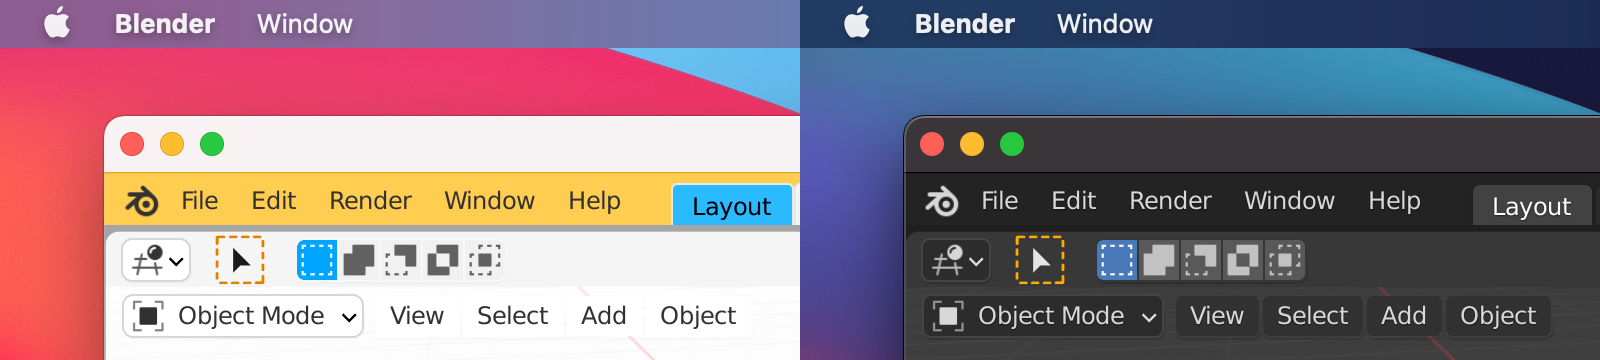 Side-by-side screenshots of Blender on macOS 11, showcasing the “White” Blender theme to match light mode and the “Blender Dark” theme to match dark mode.